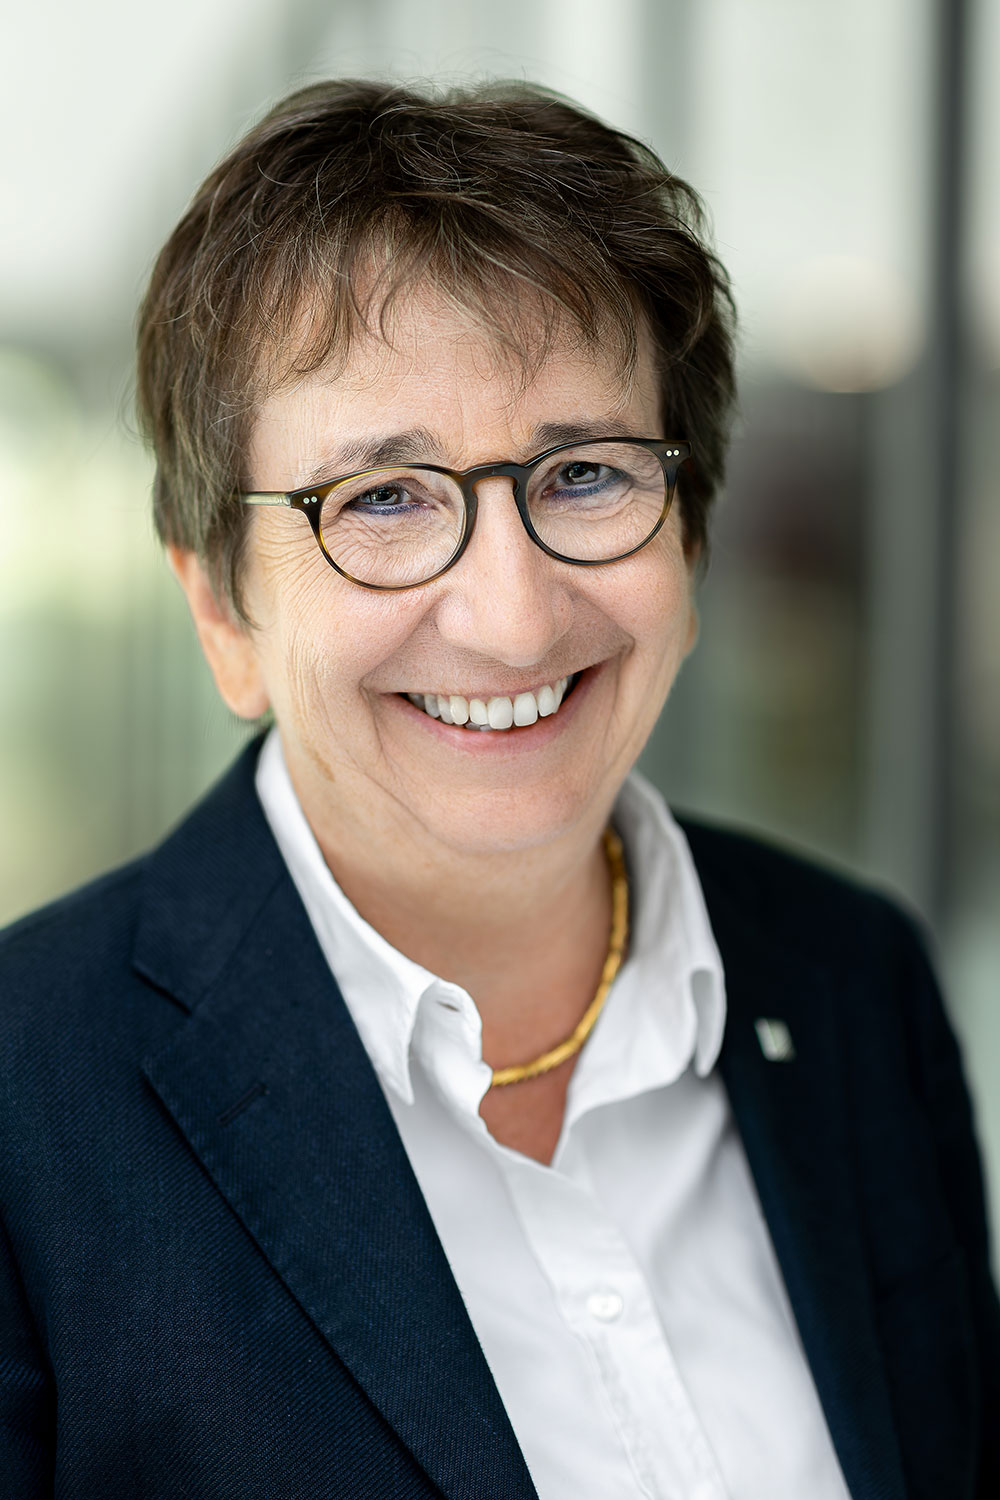 Elisabeth Ewen, executive vice president of the Fraunhofer-Gesellschaft e. V. –  Human Resources, Corporate Culture and Legal Affairs